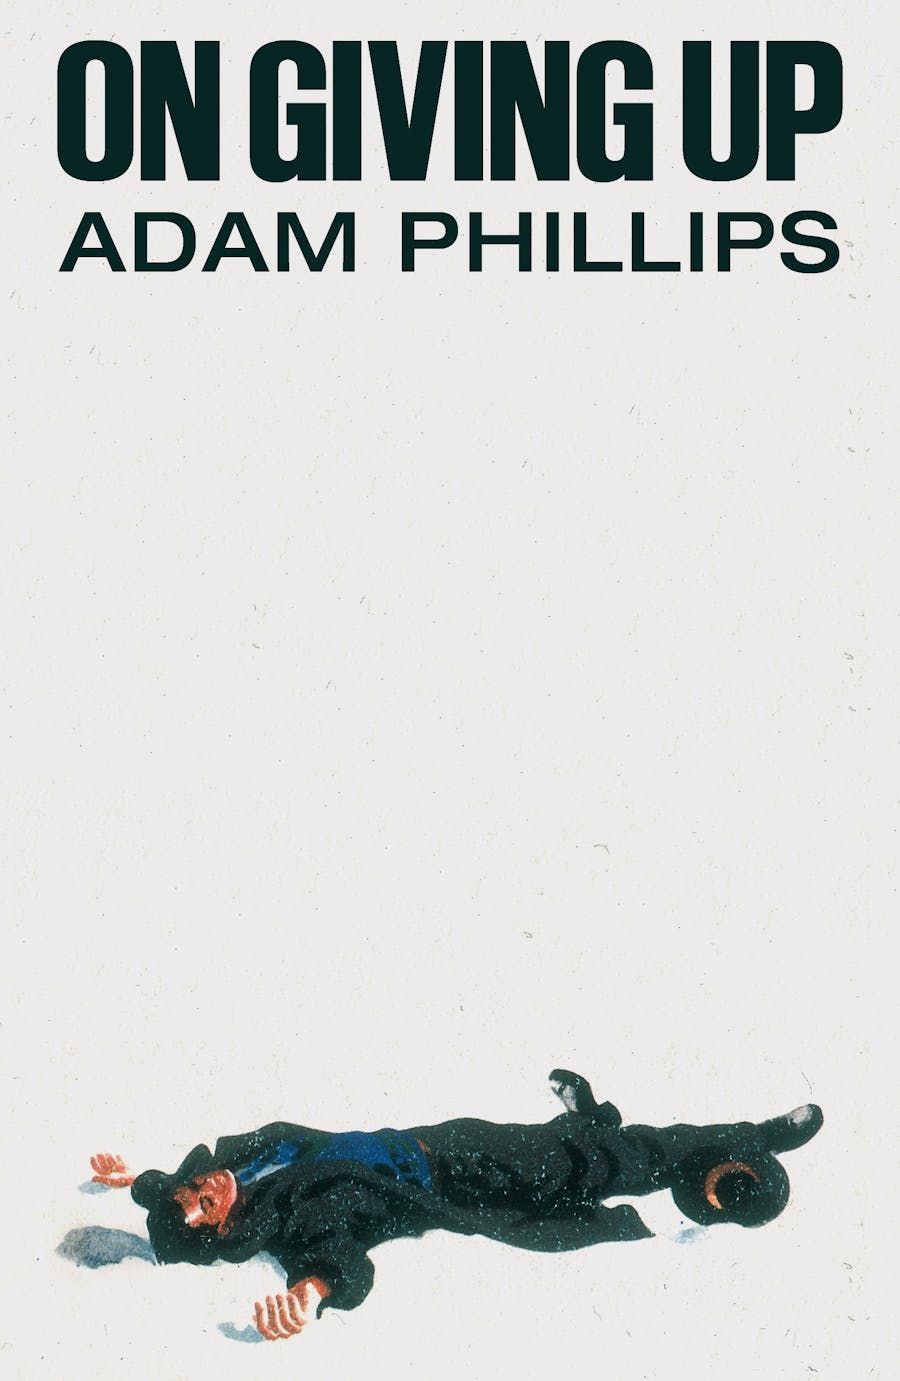 Endless Renewal: On Adam Phillips’s “On Giving Up”